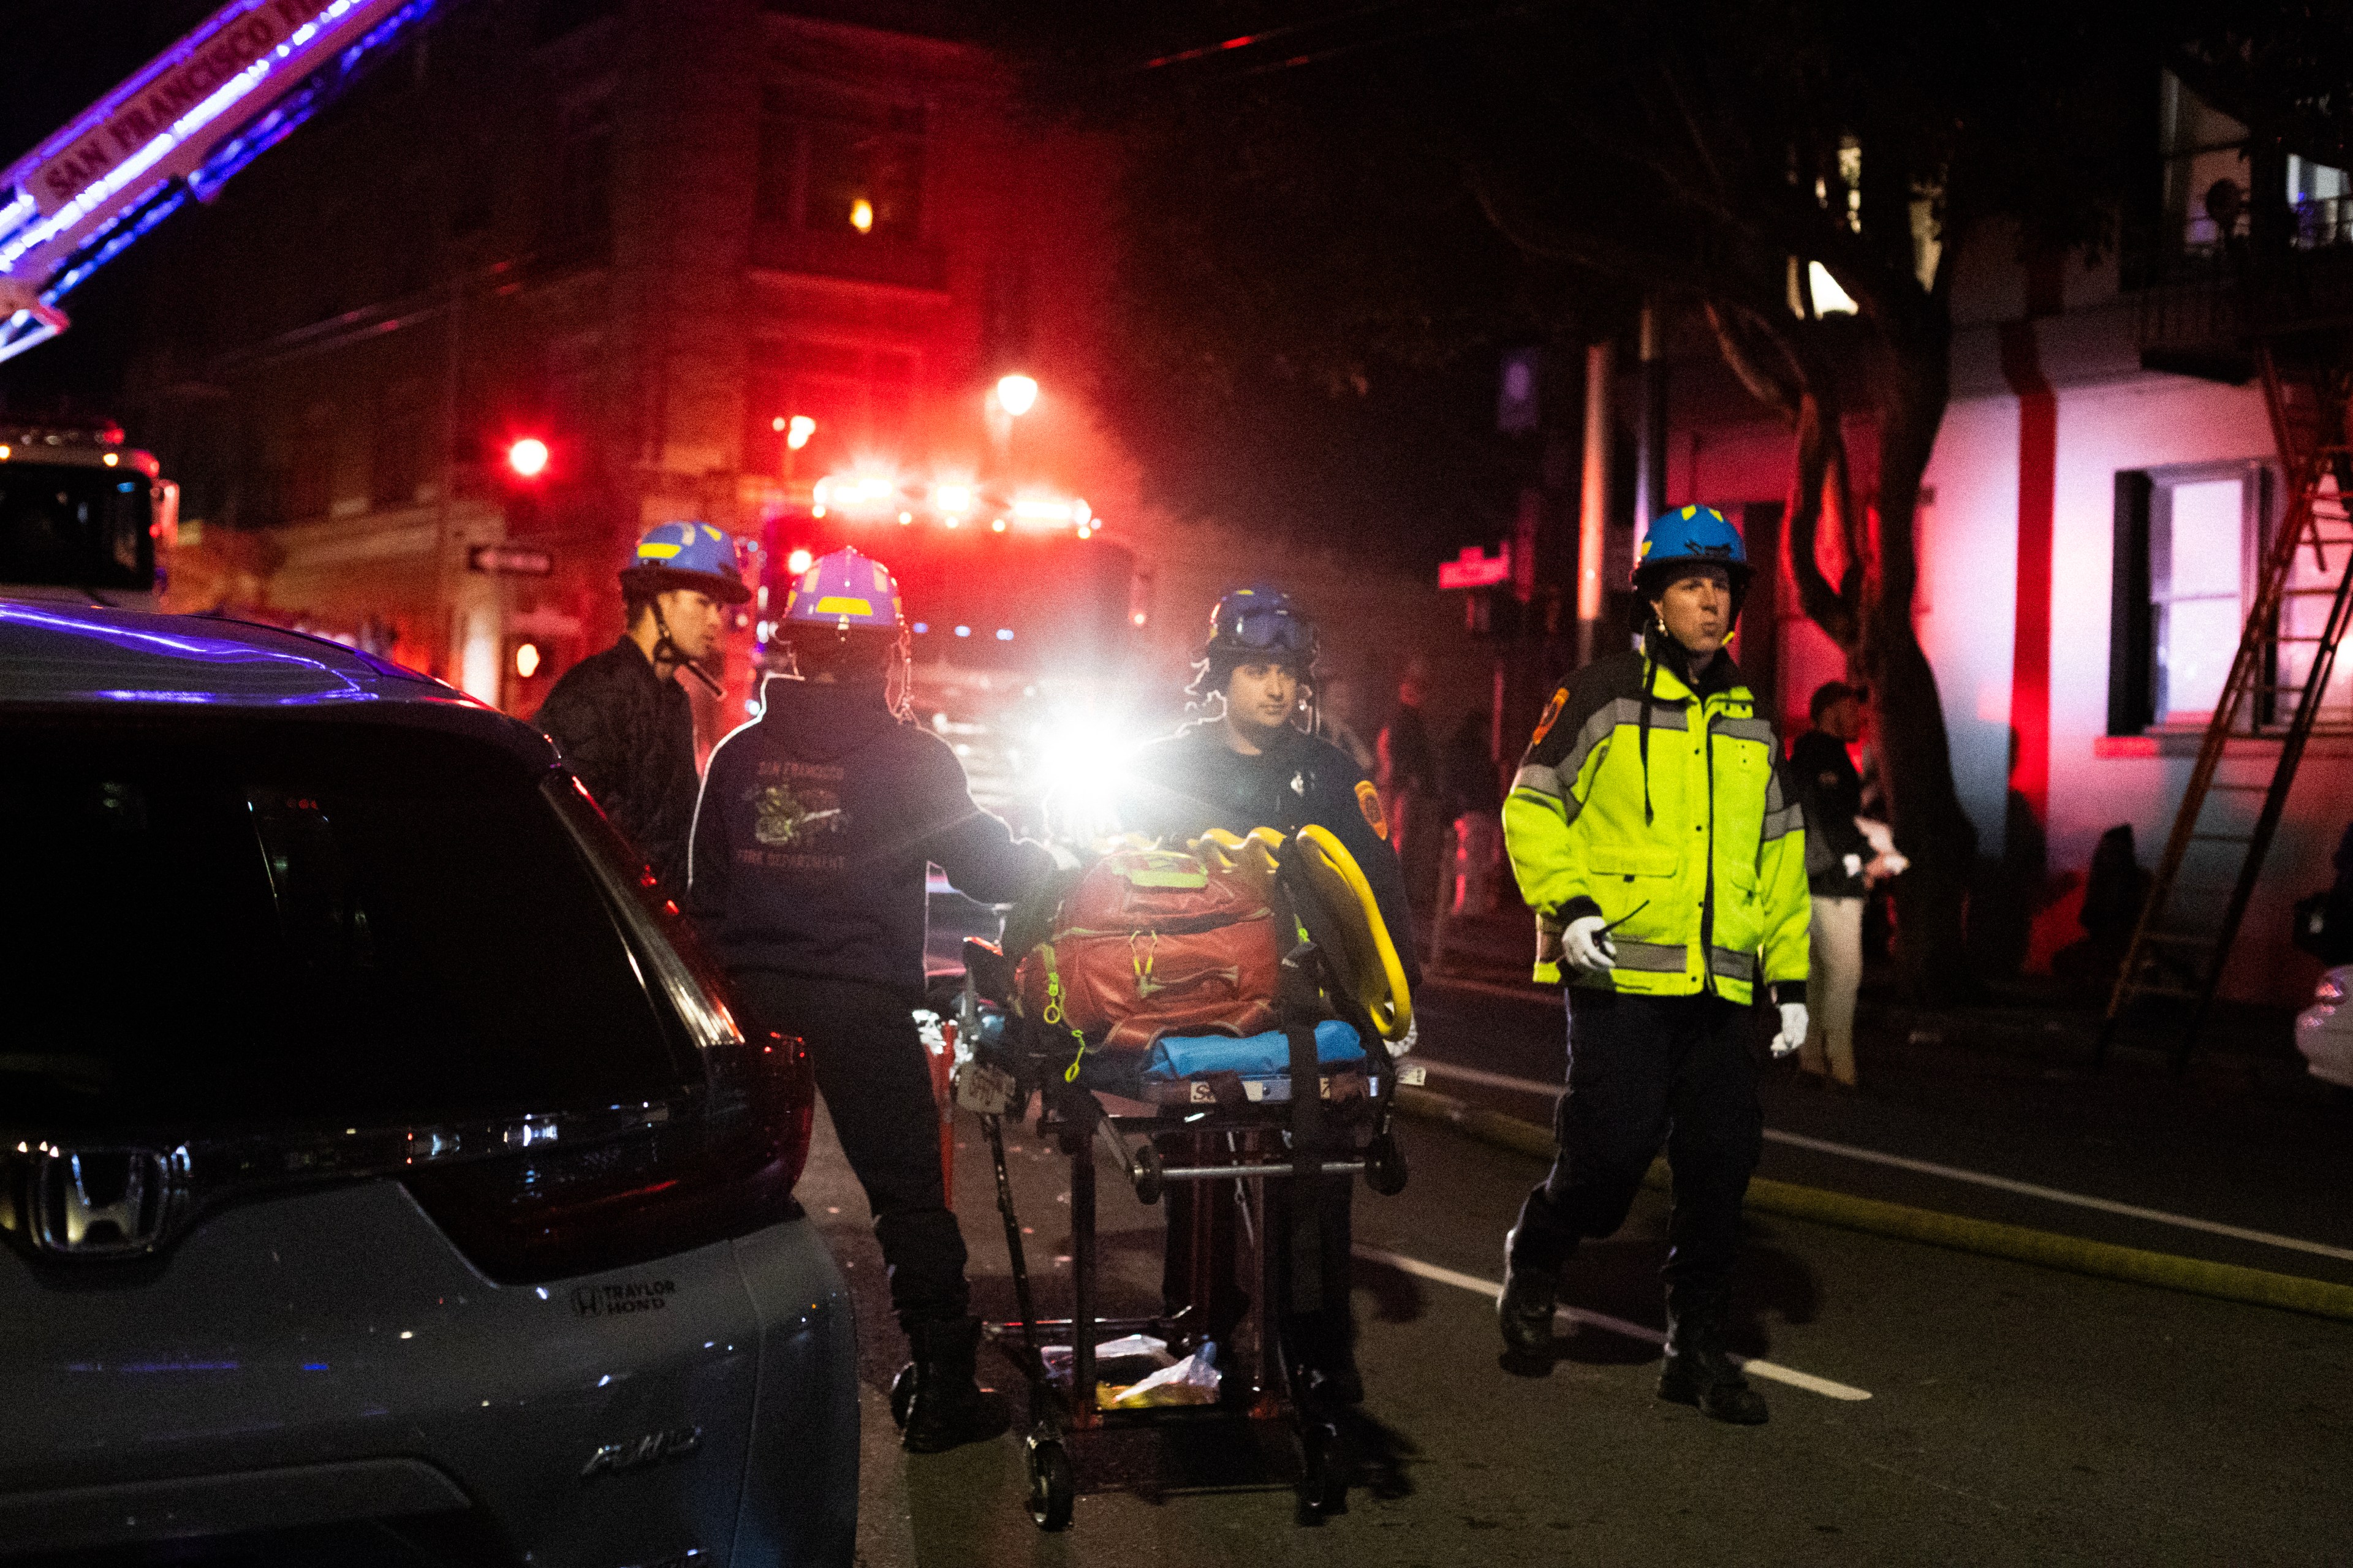 First responders stand by a stretcher outside an apartment building at night.